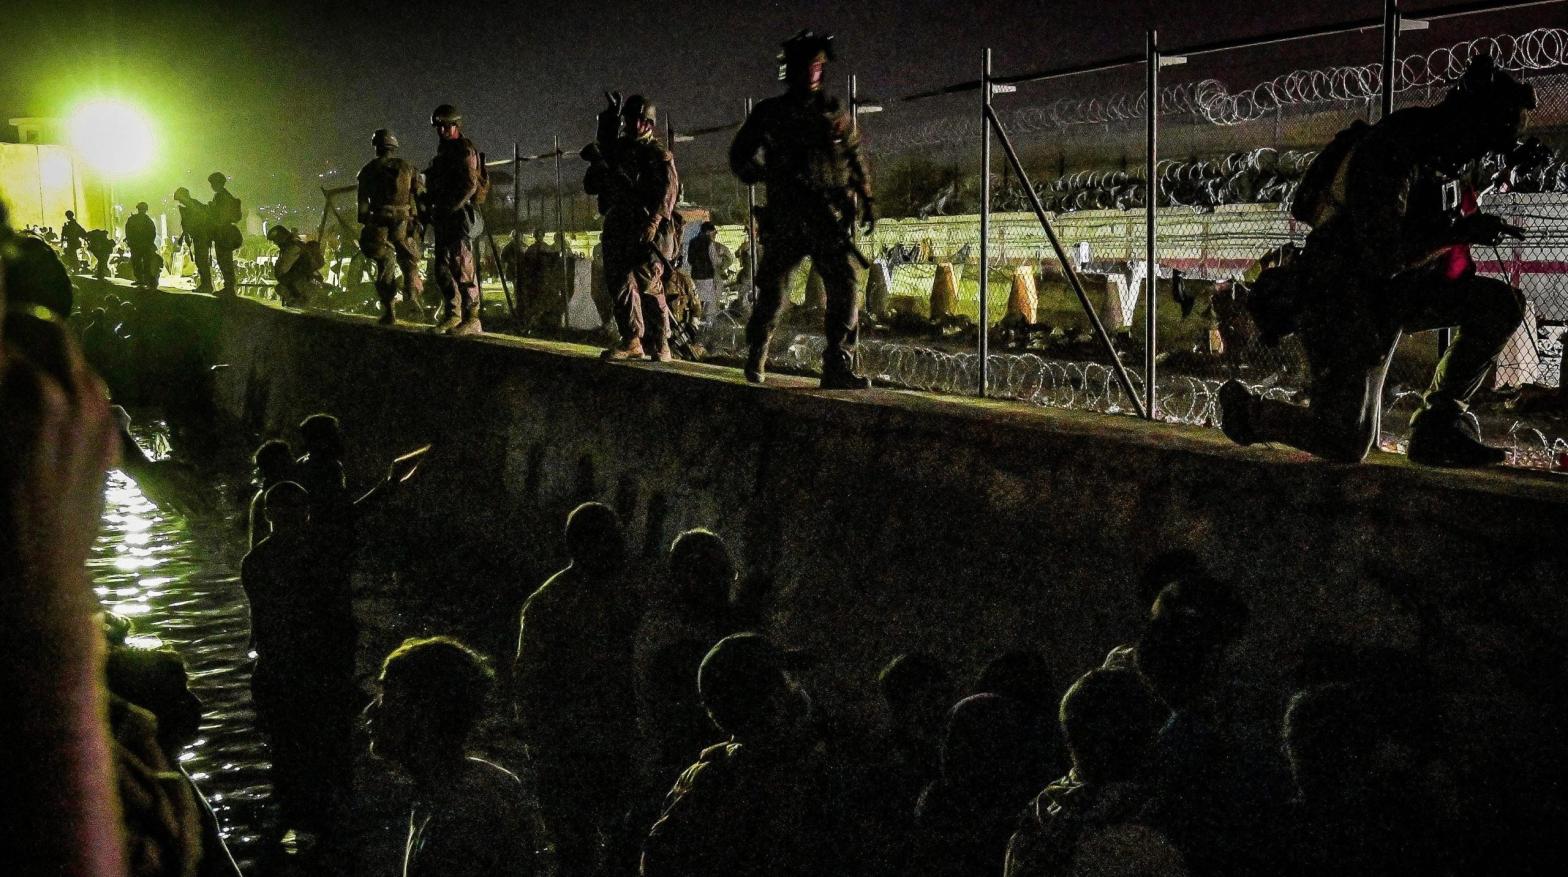 British and Canadian soldiers stand guard near a canal as Afghans wait outside the foreign military-controlled part of the airport in Kabul on August 22, 2021. (Photo: Wakil Kohsar/AFP, Getty Images)